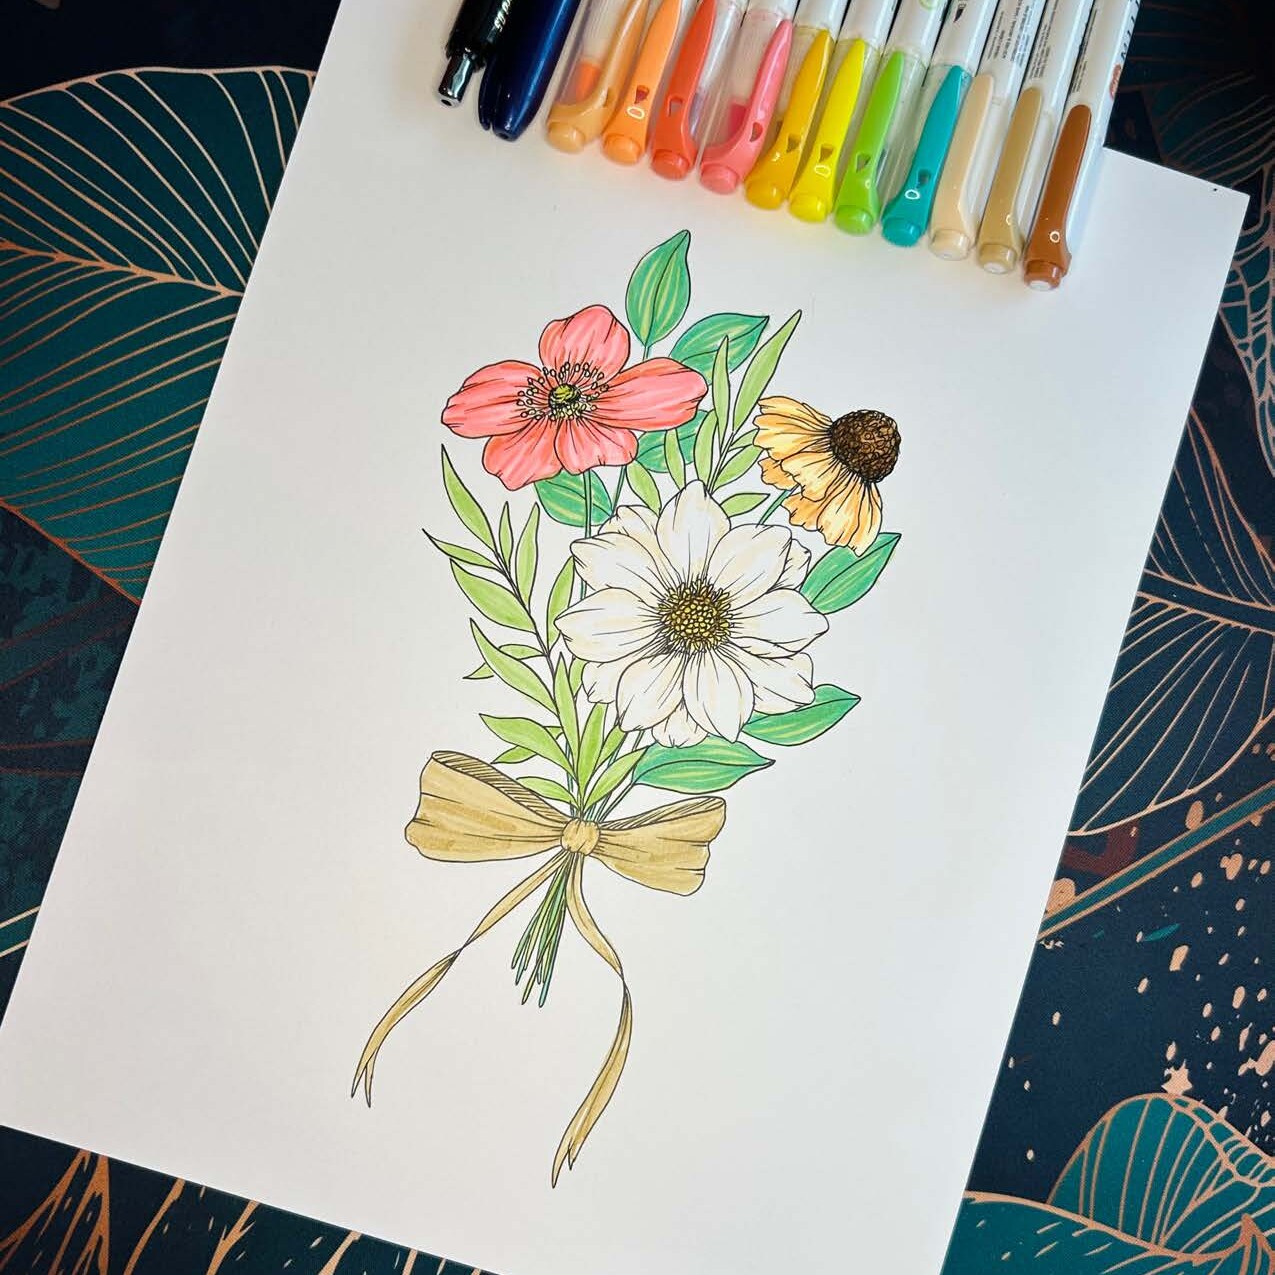 Drawing Flower Bouquets with Zebra Mildliner™ and @karenb.creations